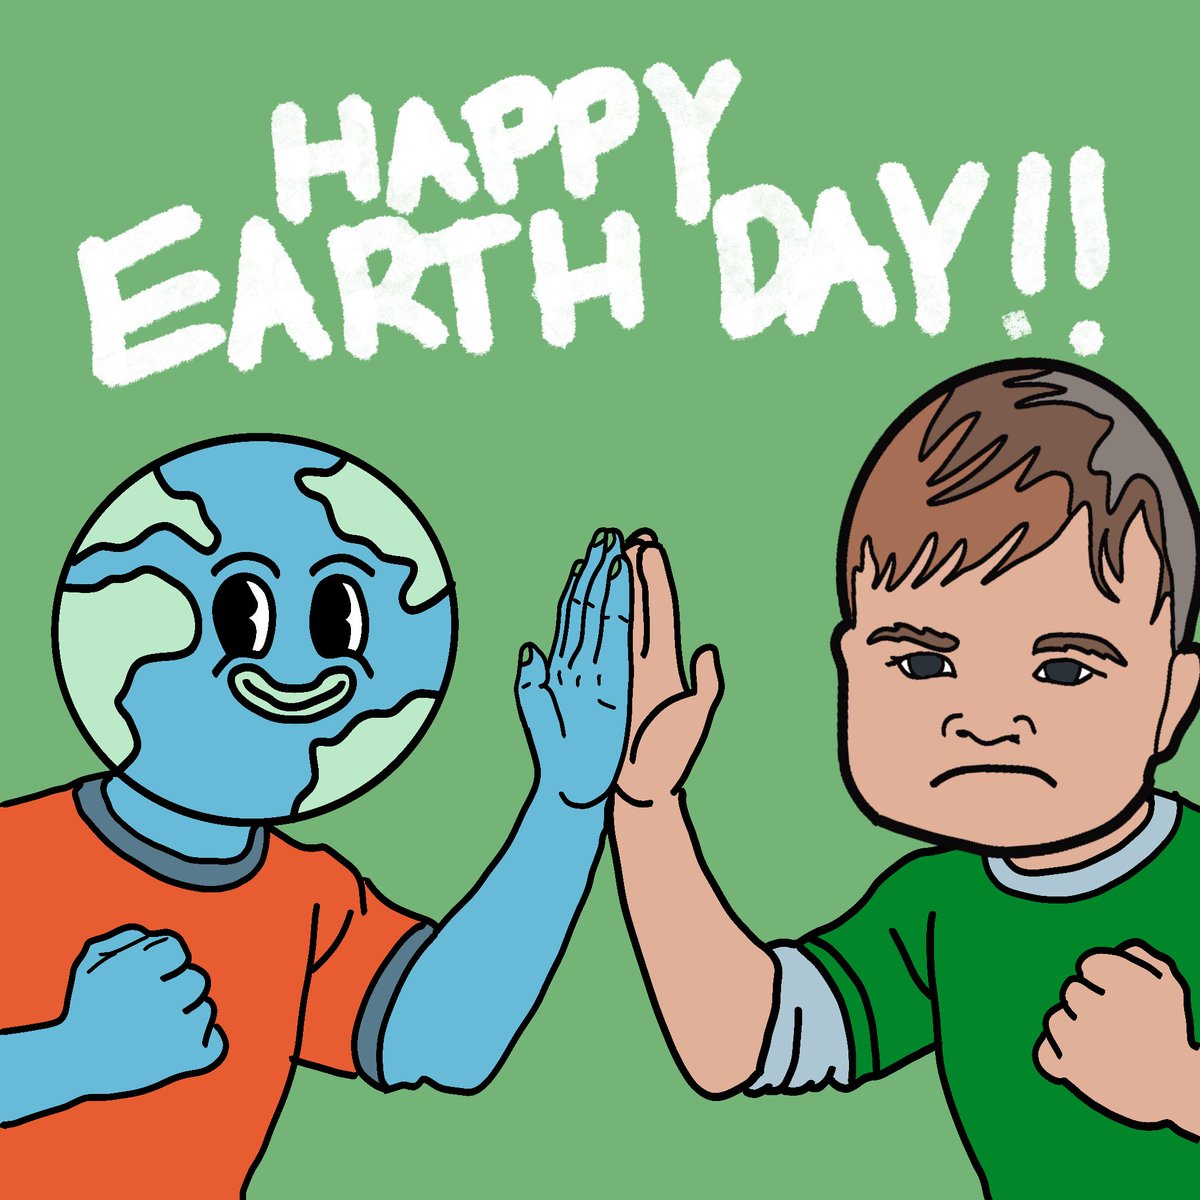 Happy Earth Day from $SKID

#EarthDay #SuccessKid #WorldPeace #HappyEarthDay